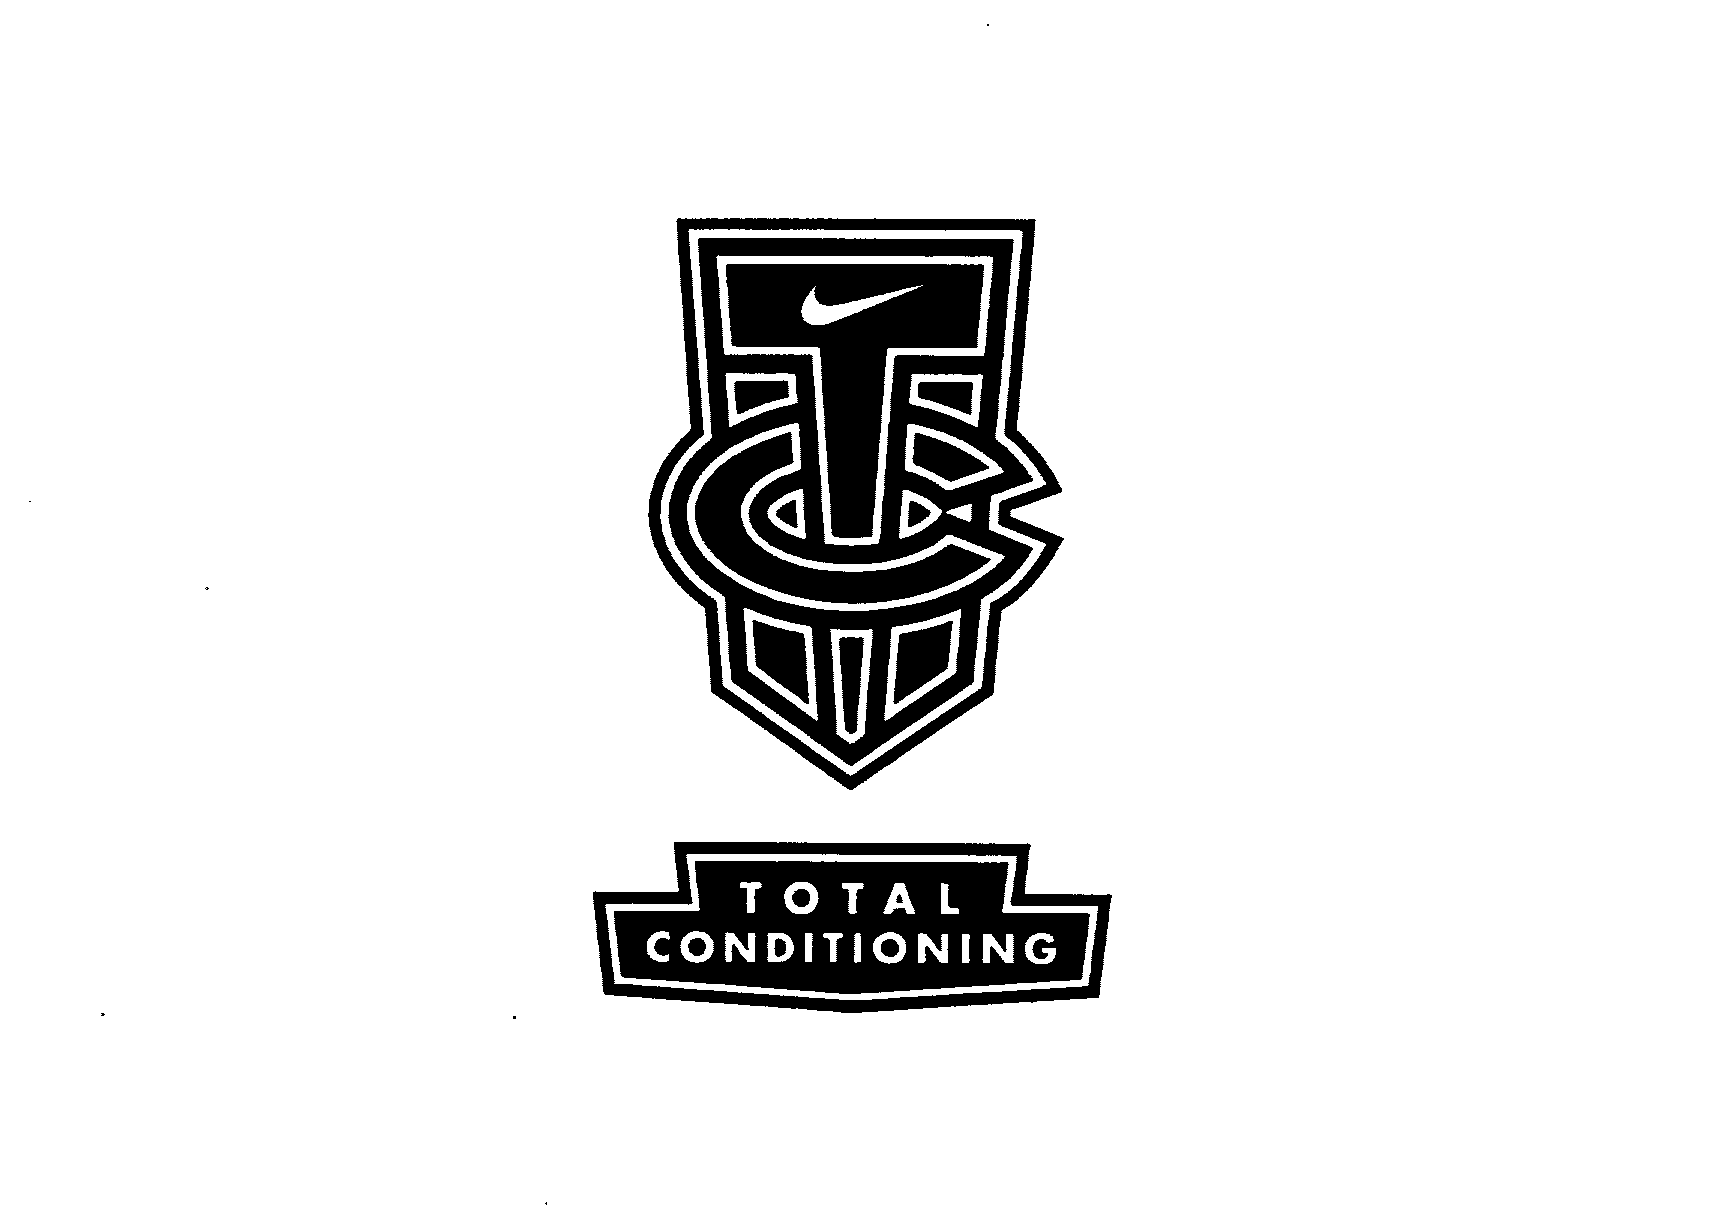  TC TOTAL CONDITIONING